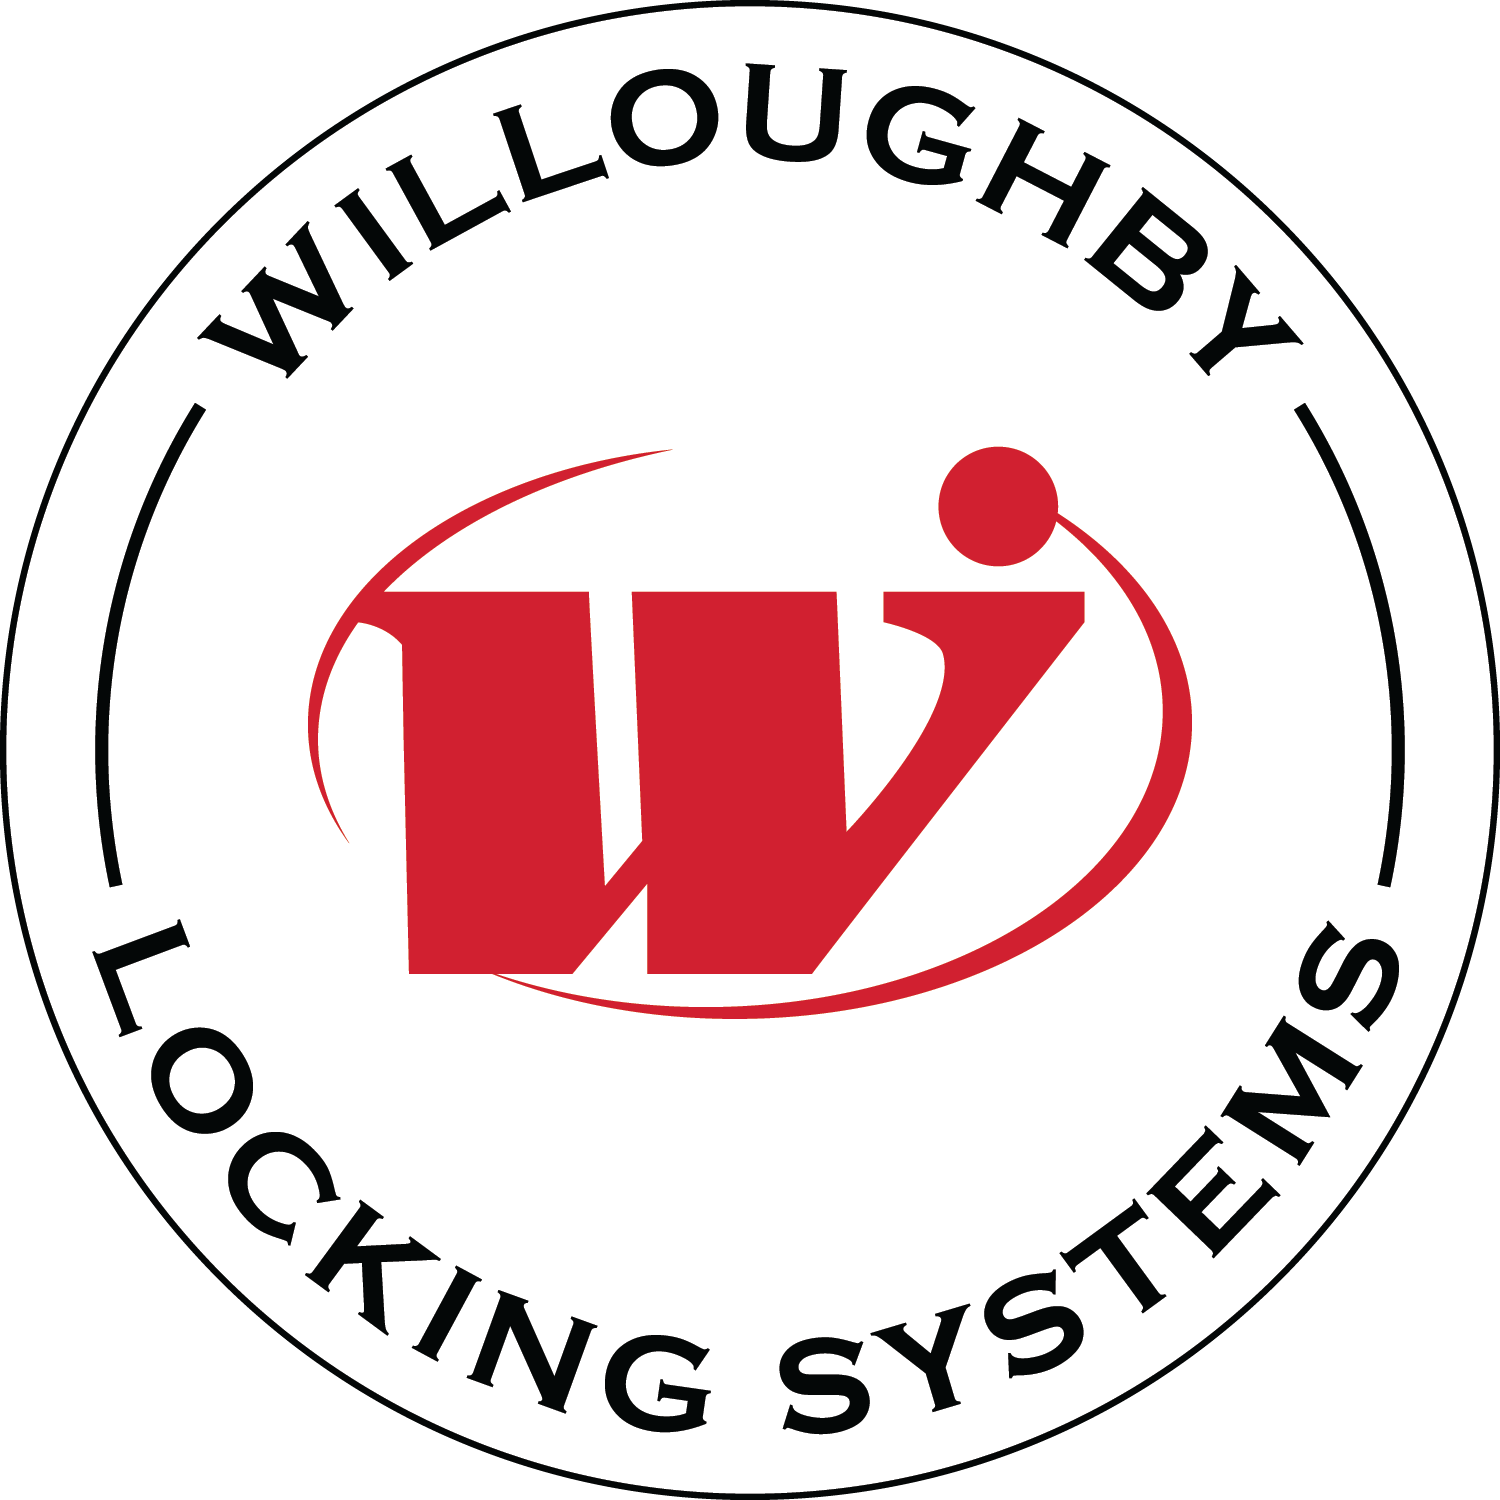 The Willoughby Locking Systems Logo is circular, with the word "Willoughby" at the top and "Locking Systems" at the bottom curved around the circle. There are lines that are disconnected from the words that complete the circle. In the center is the Willoughby Logo, which is a red letter W and I combined, with red lines around it in an oval.